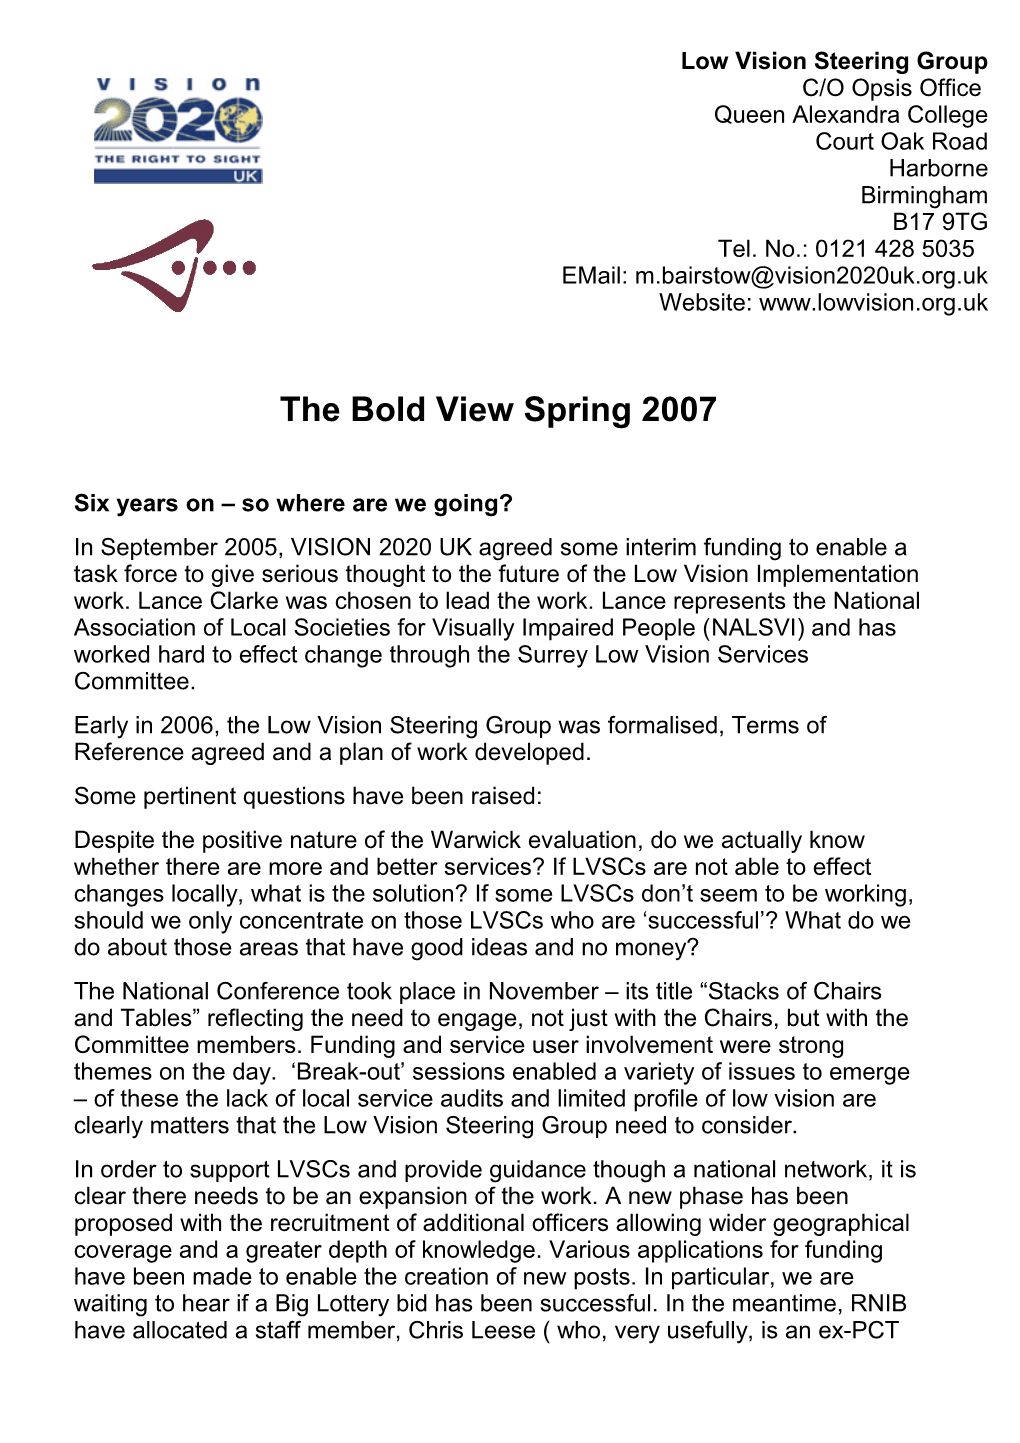 The Bold View Spring 2007